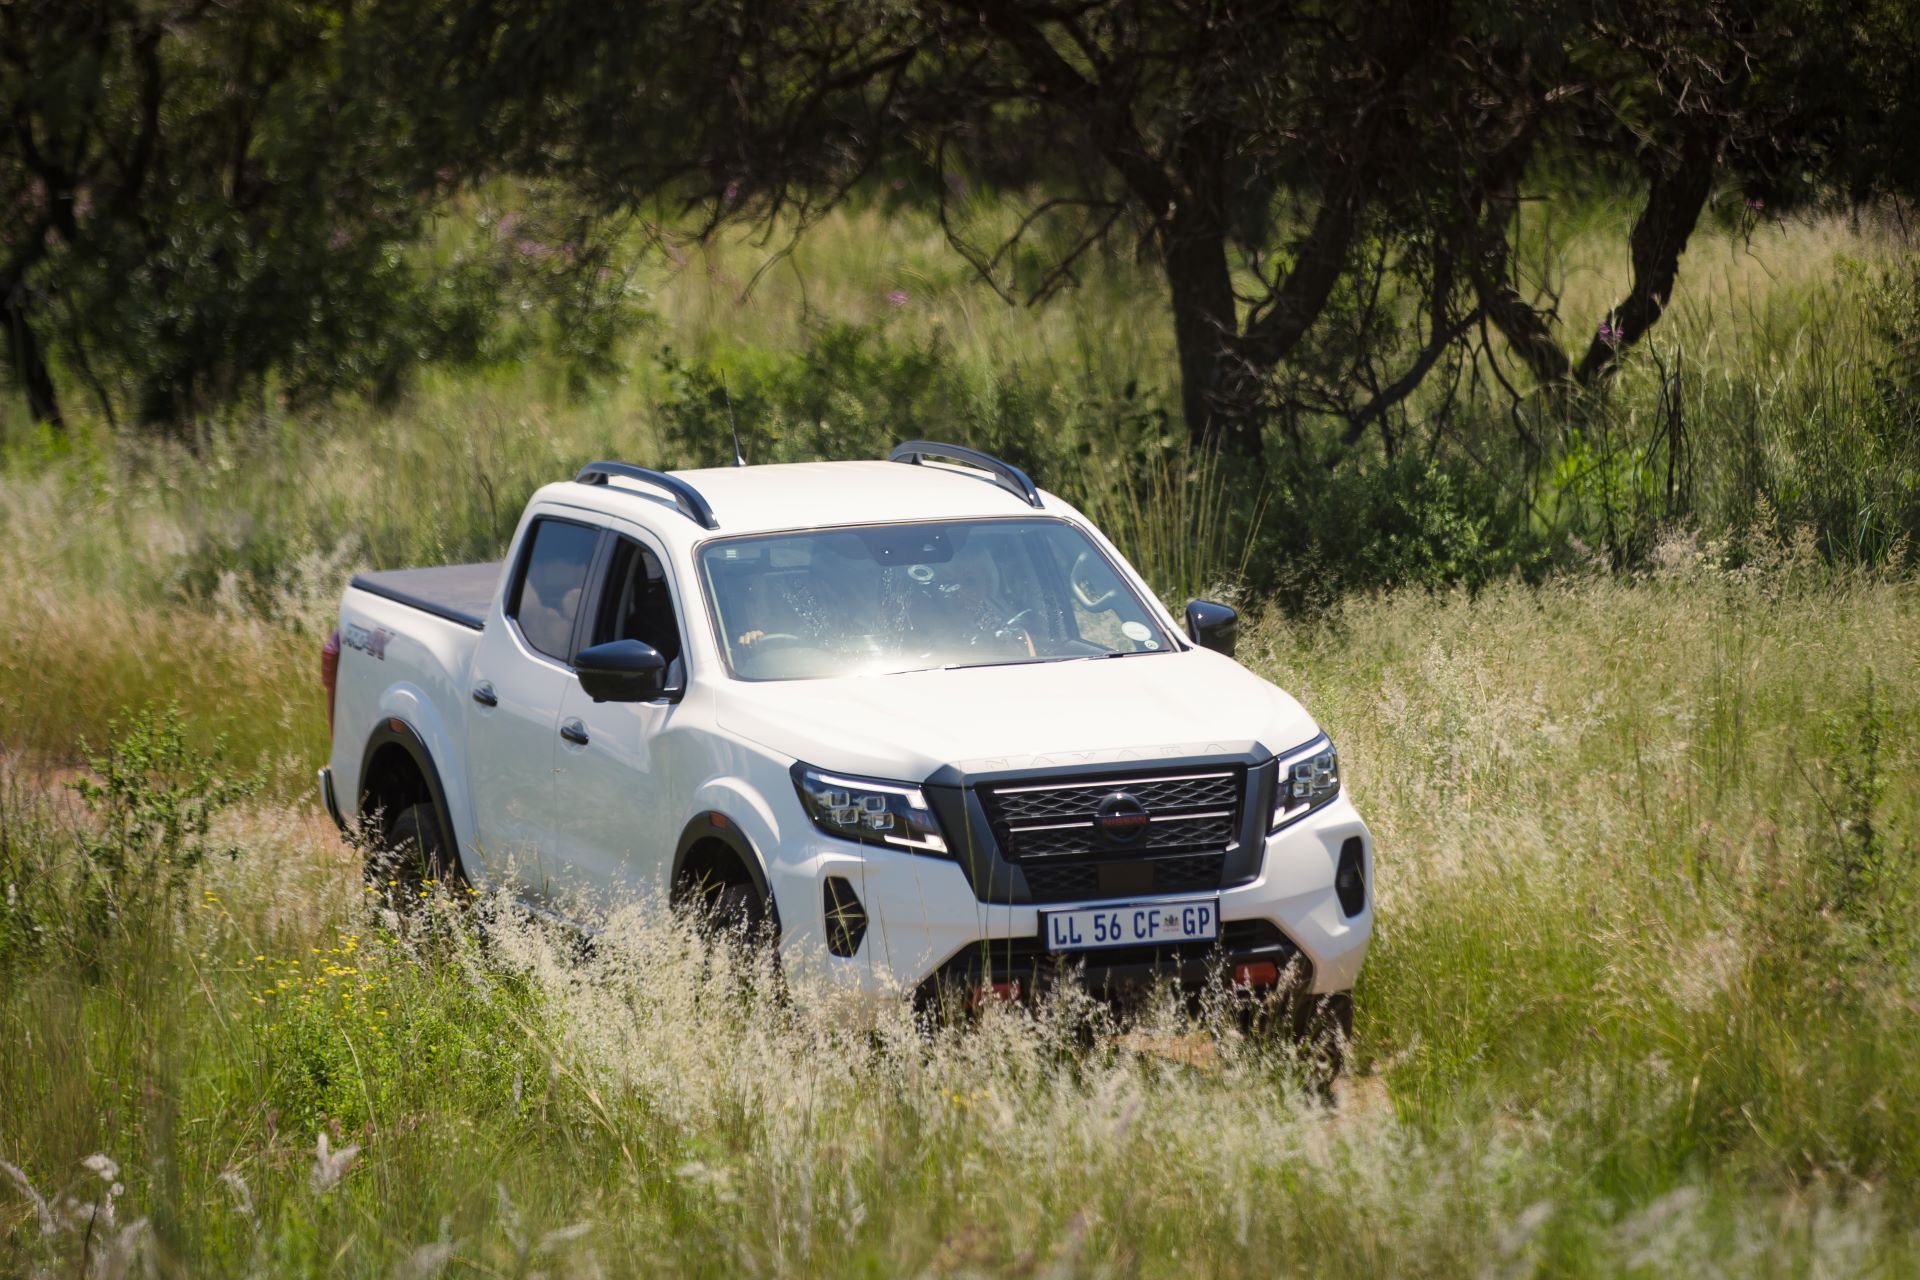 Do something different this month of love with the help of the Nissan Navara